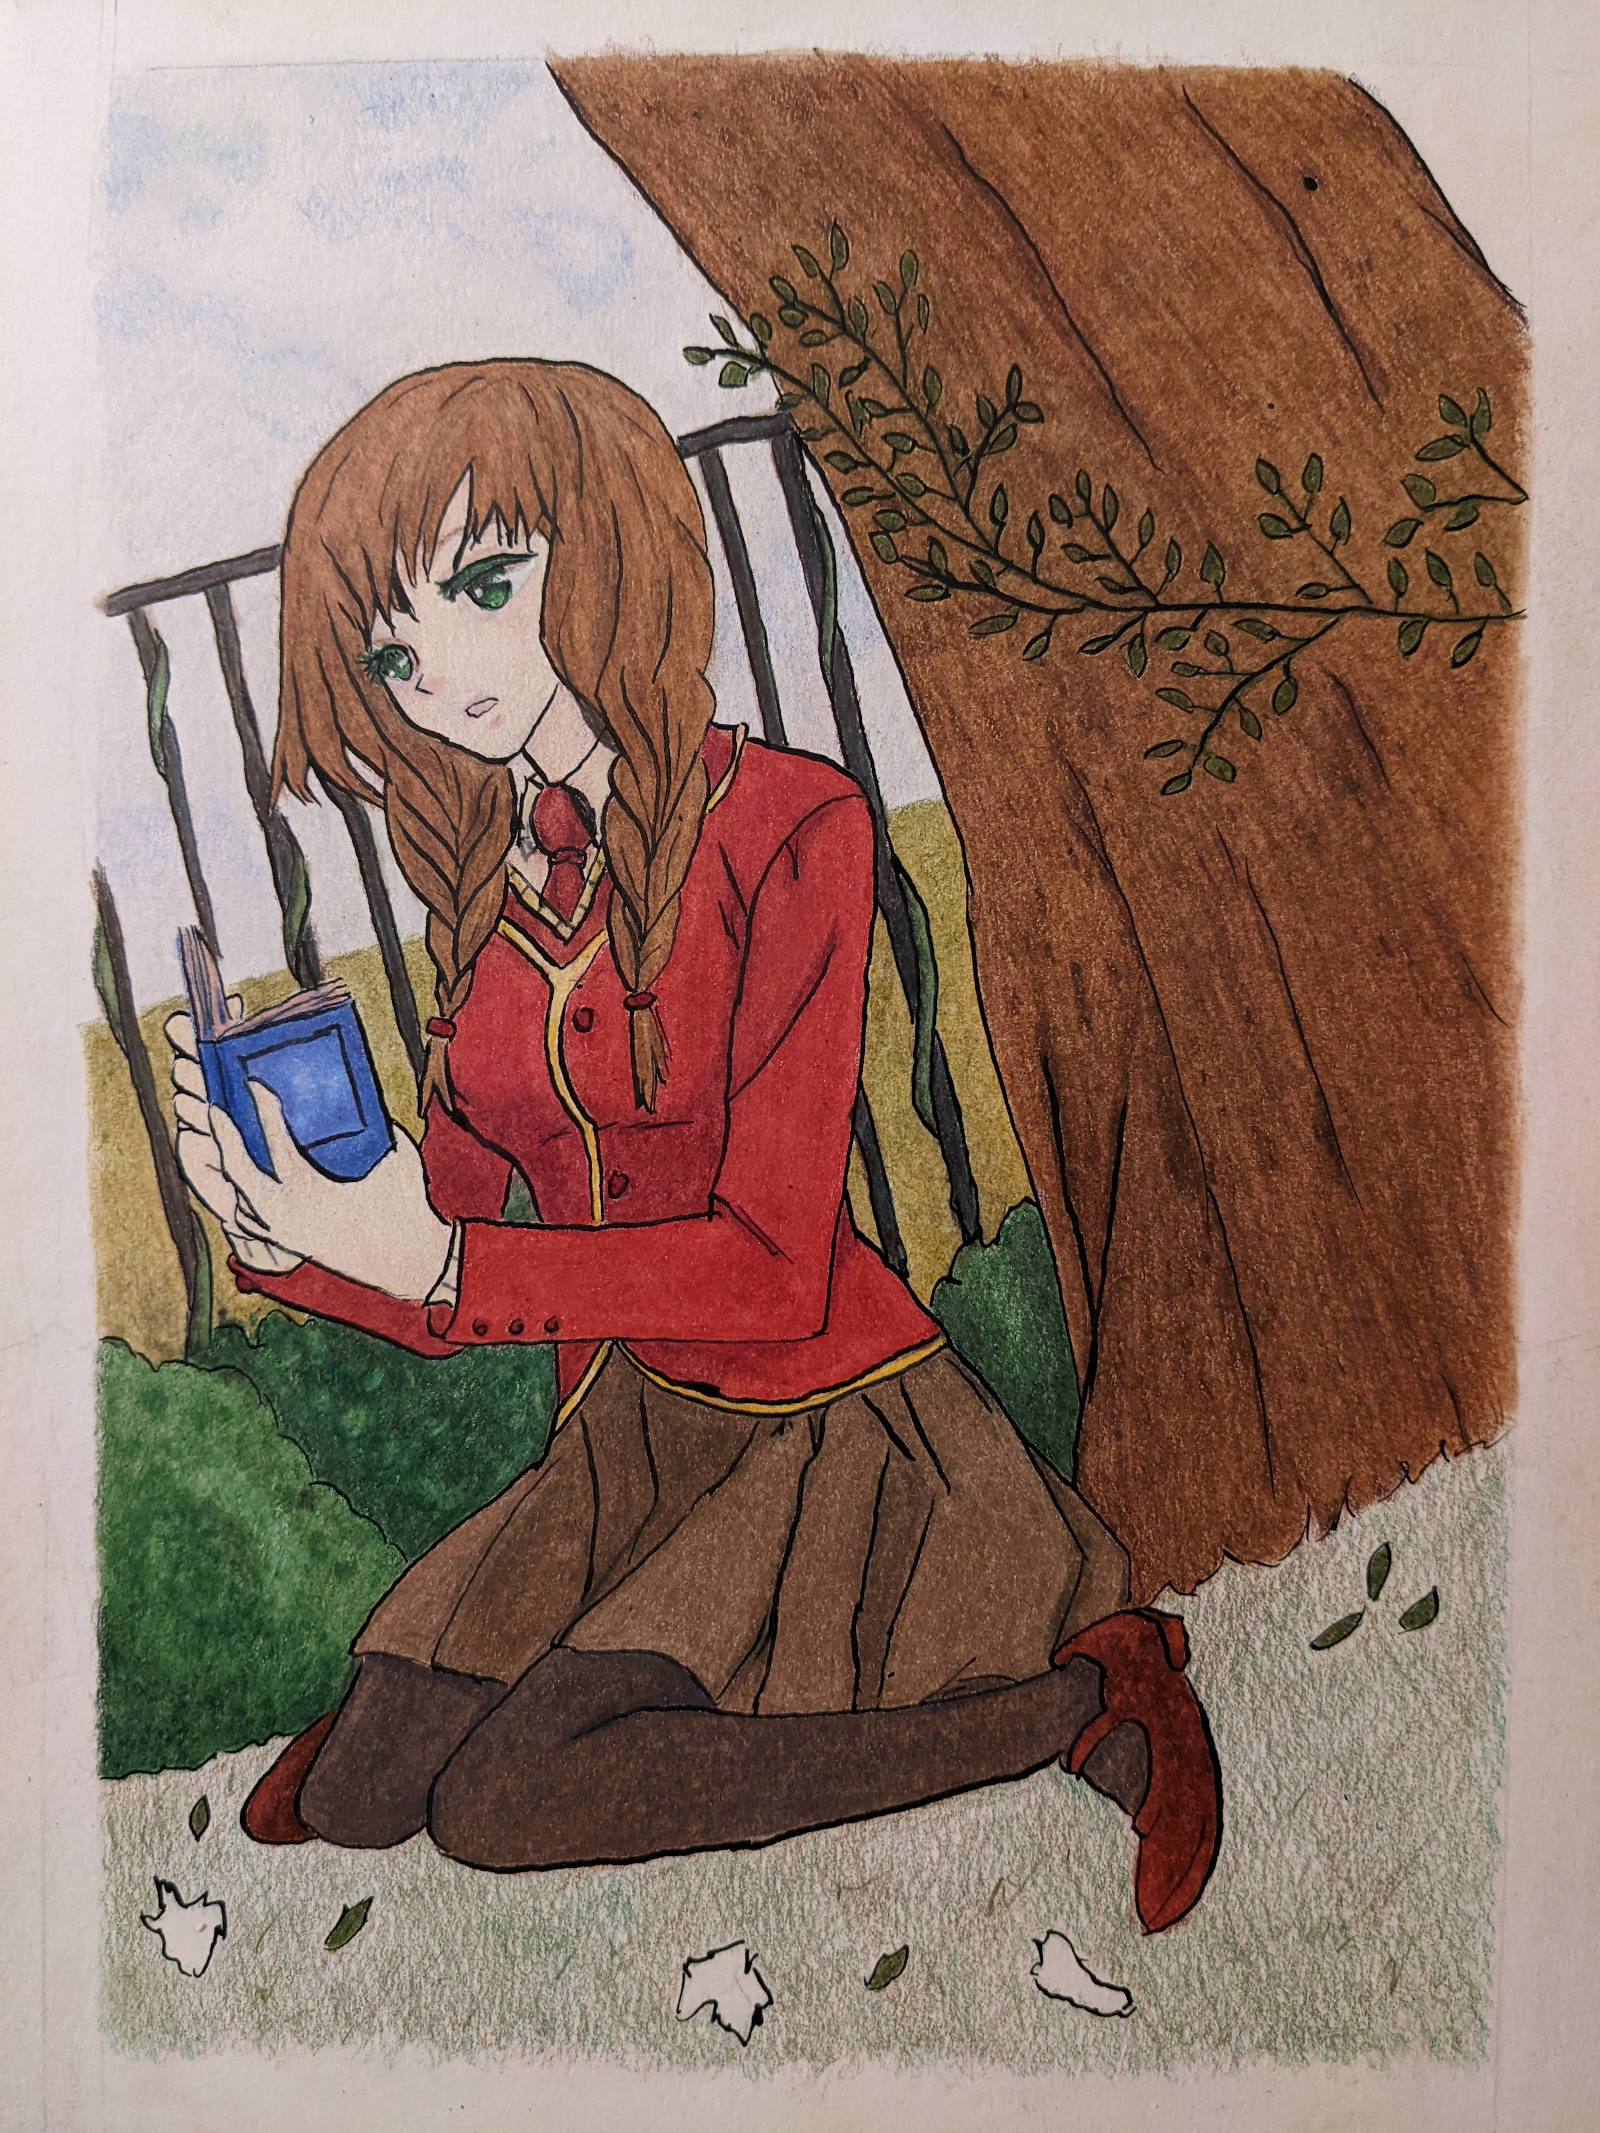 Girl with red blazer and a brown skirt sitting in front of bushes and a fence. A tree is next to her. She is reading a diary. Grass in front of her not fully colored.